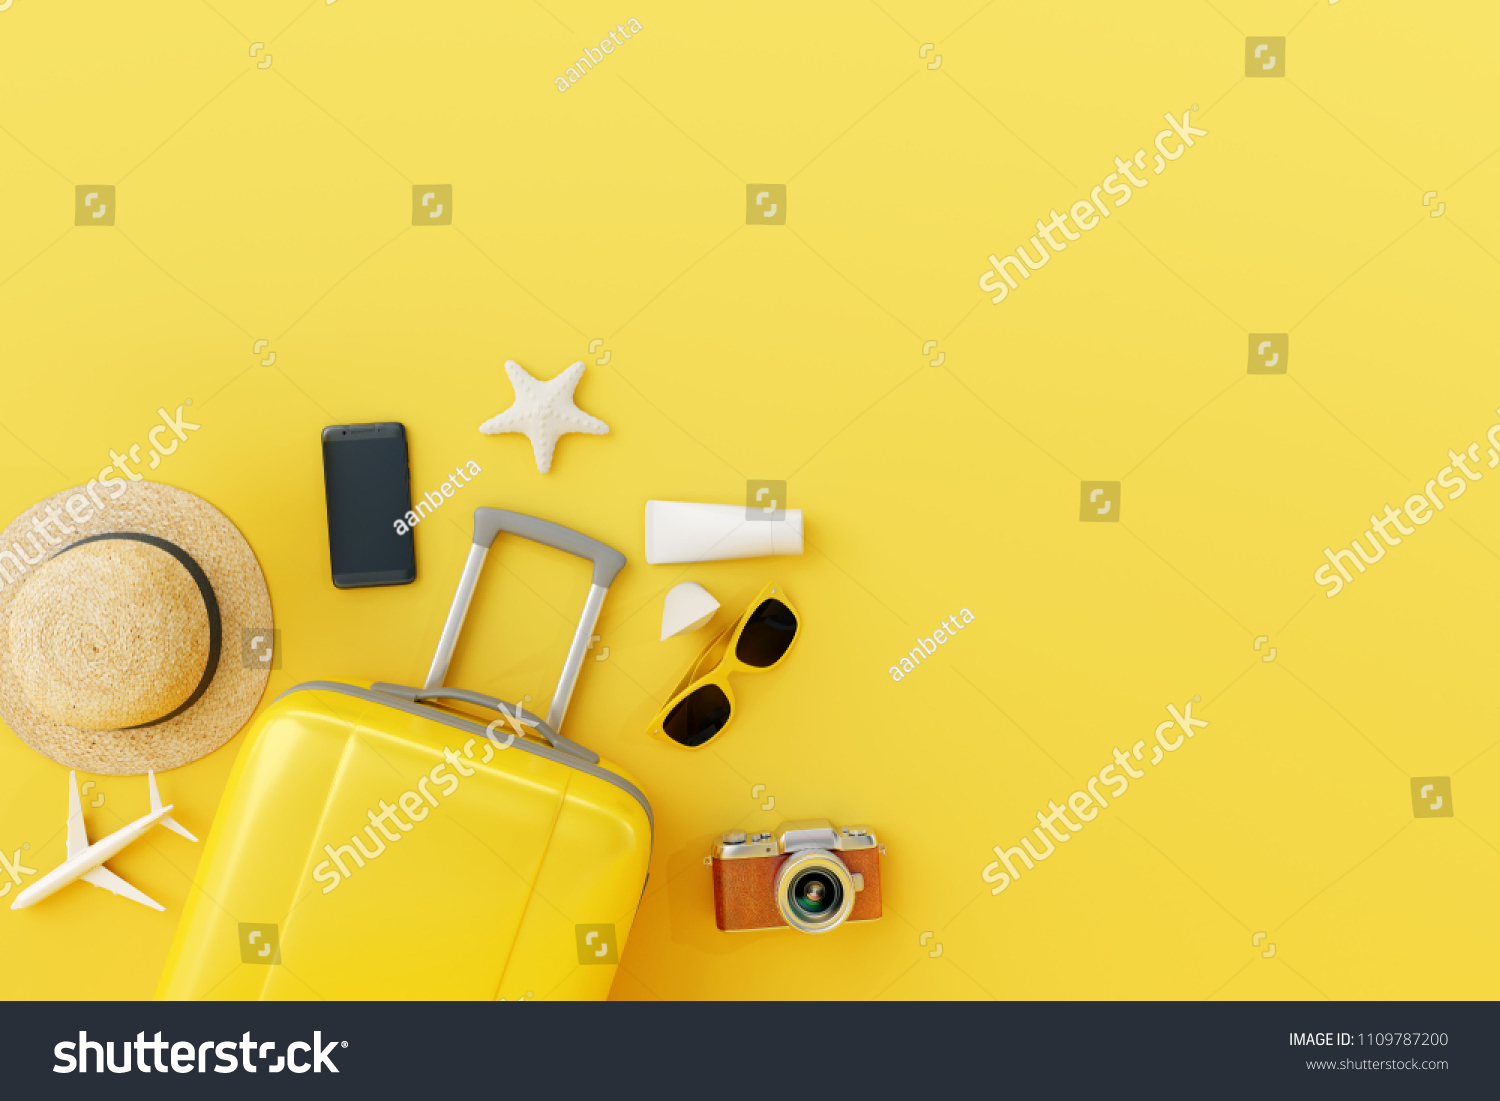 Flat lay yellow suitcase with traveler accessories on yellow background. travel concept #1109787200